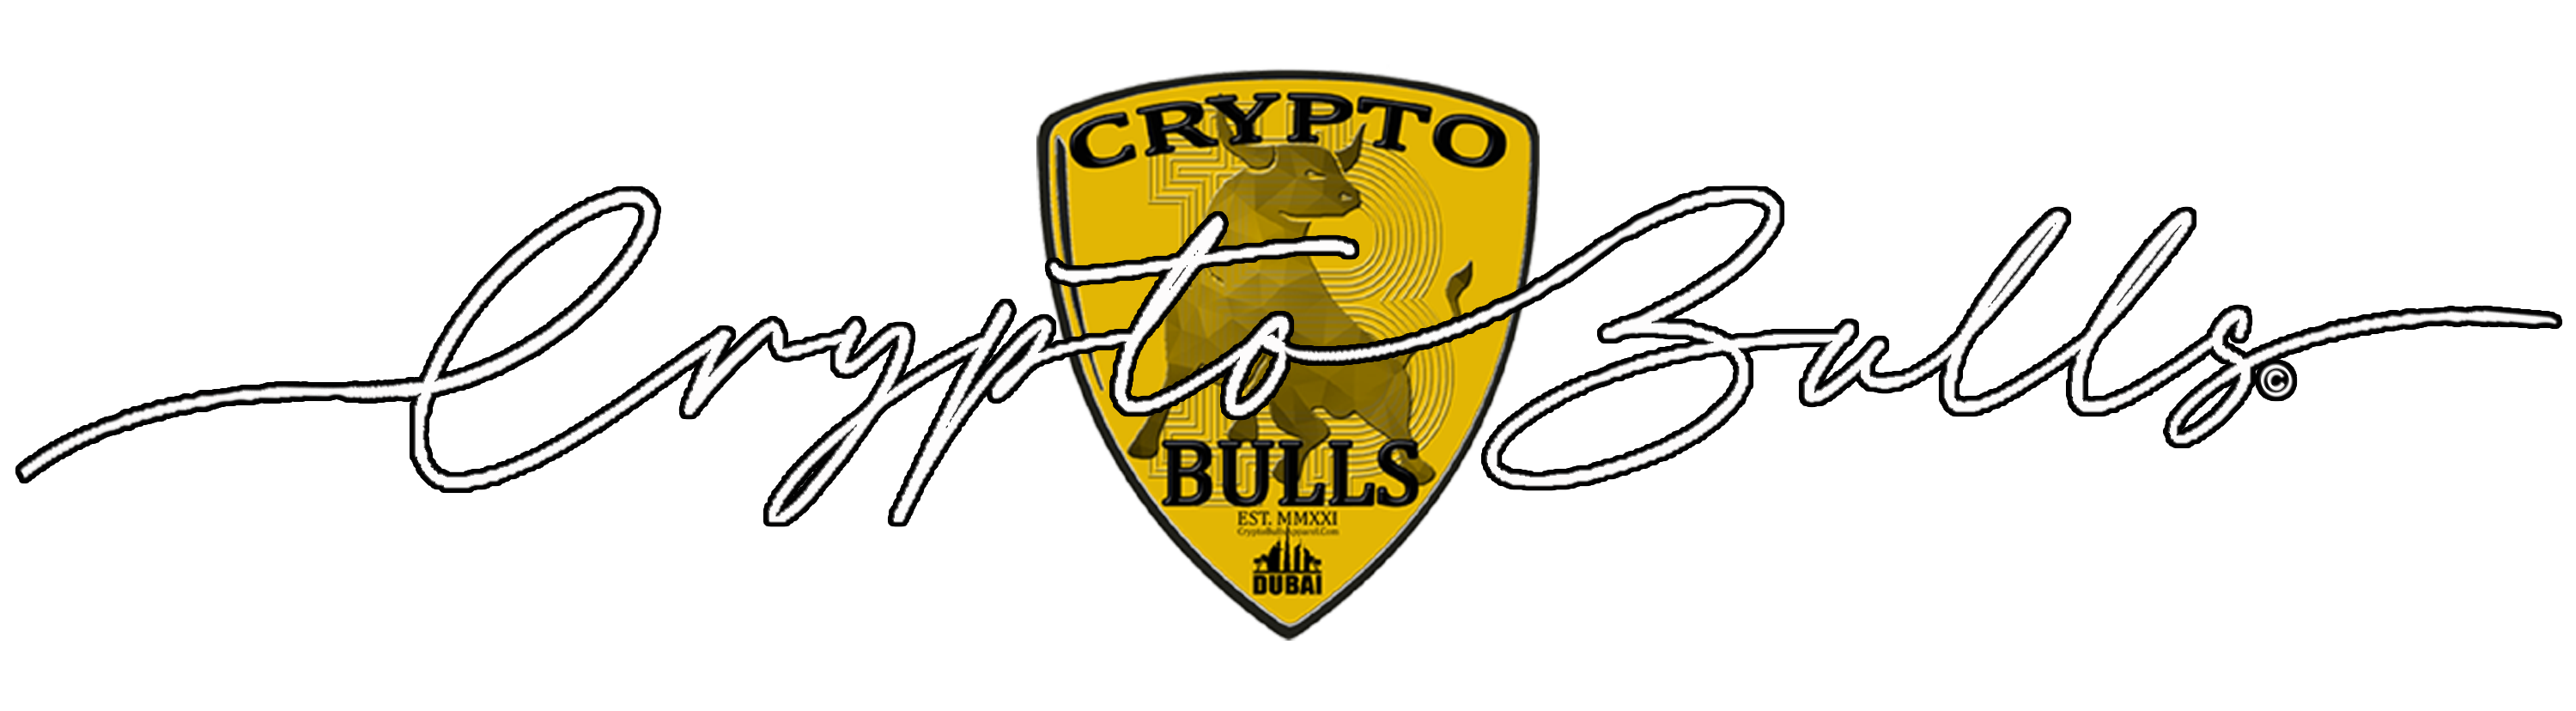 Crypto Bulls Apparel - The Official Luxury Crypto Inspired Lifestyle Apparel Brand For Crypto Enthusiasts where "Crypto Fashion Meets Crypto Passion"